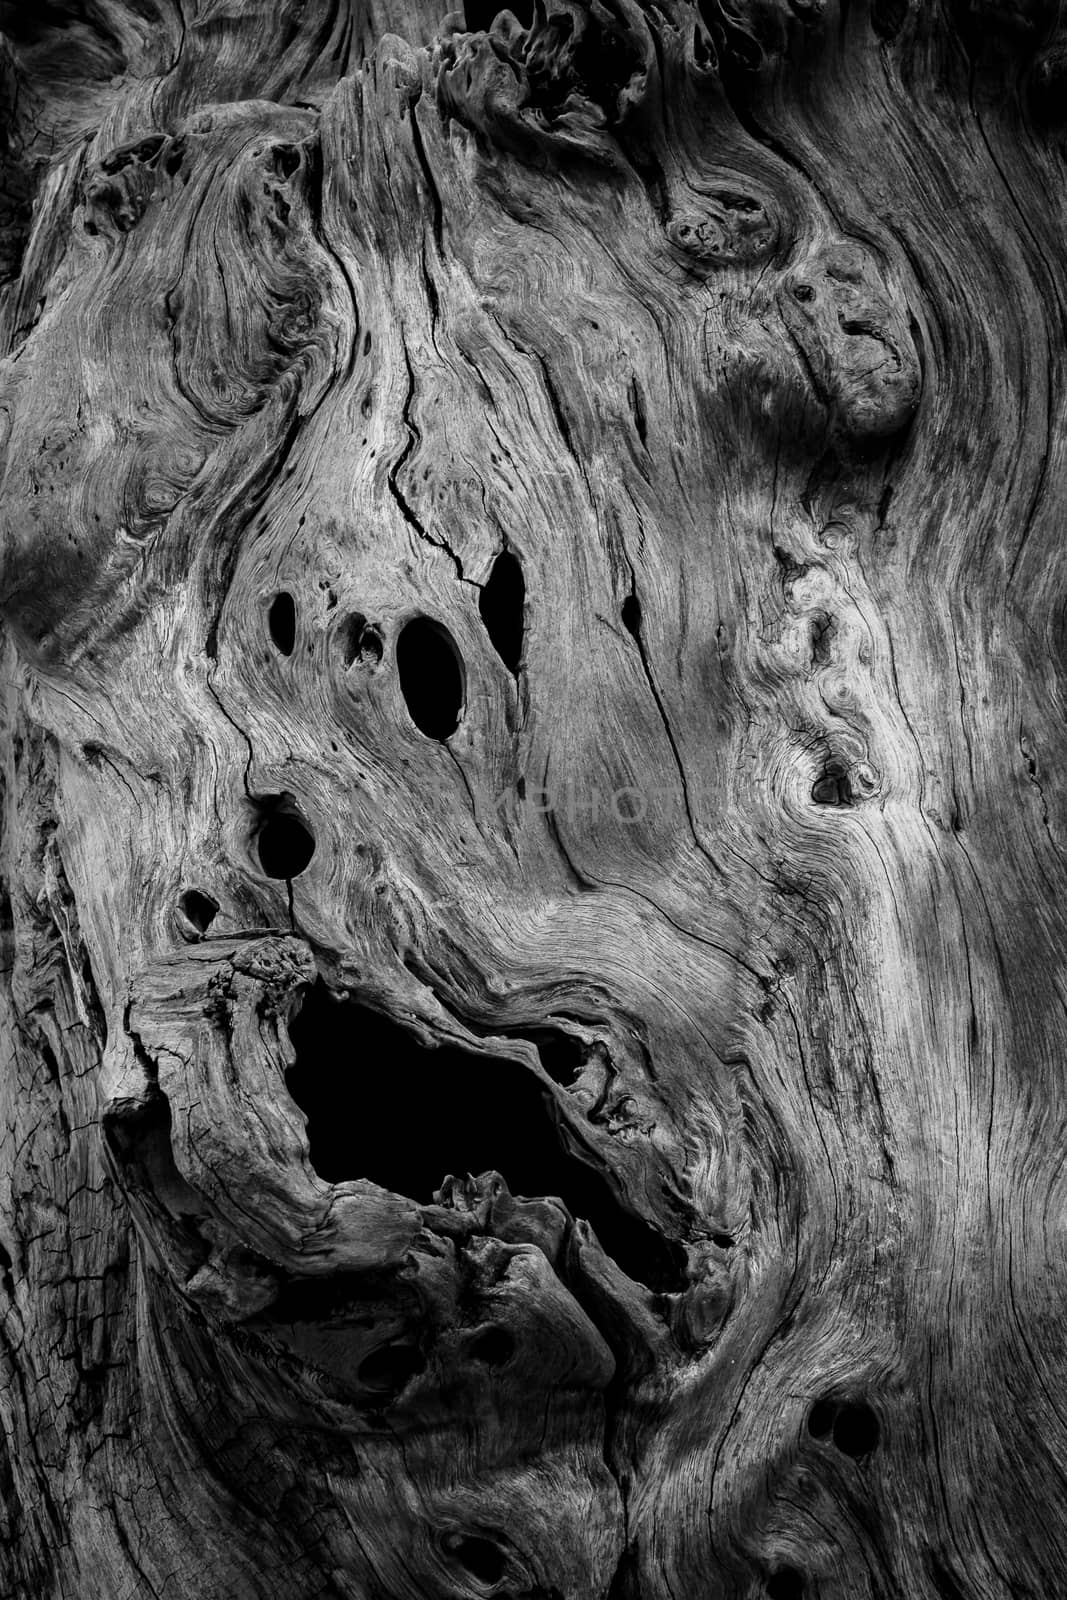 spooky of textures and patterns on the wood